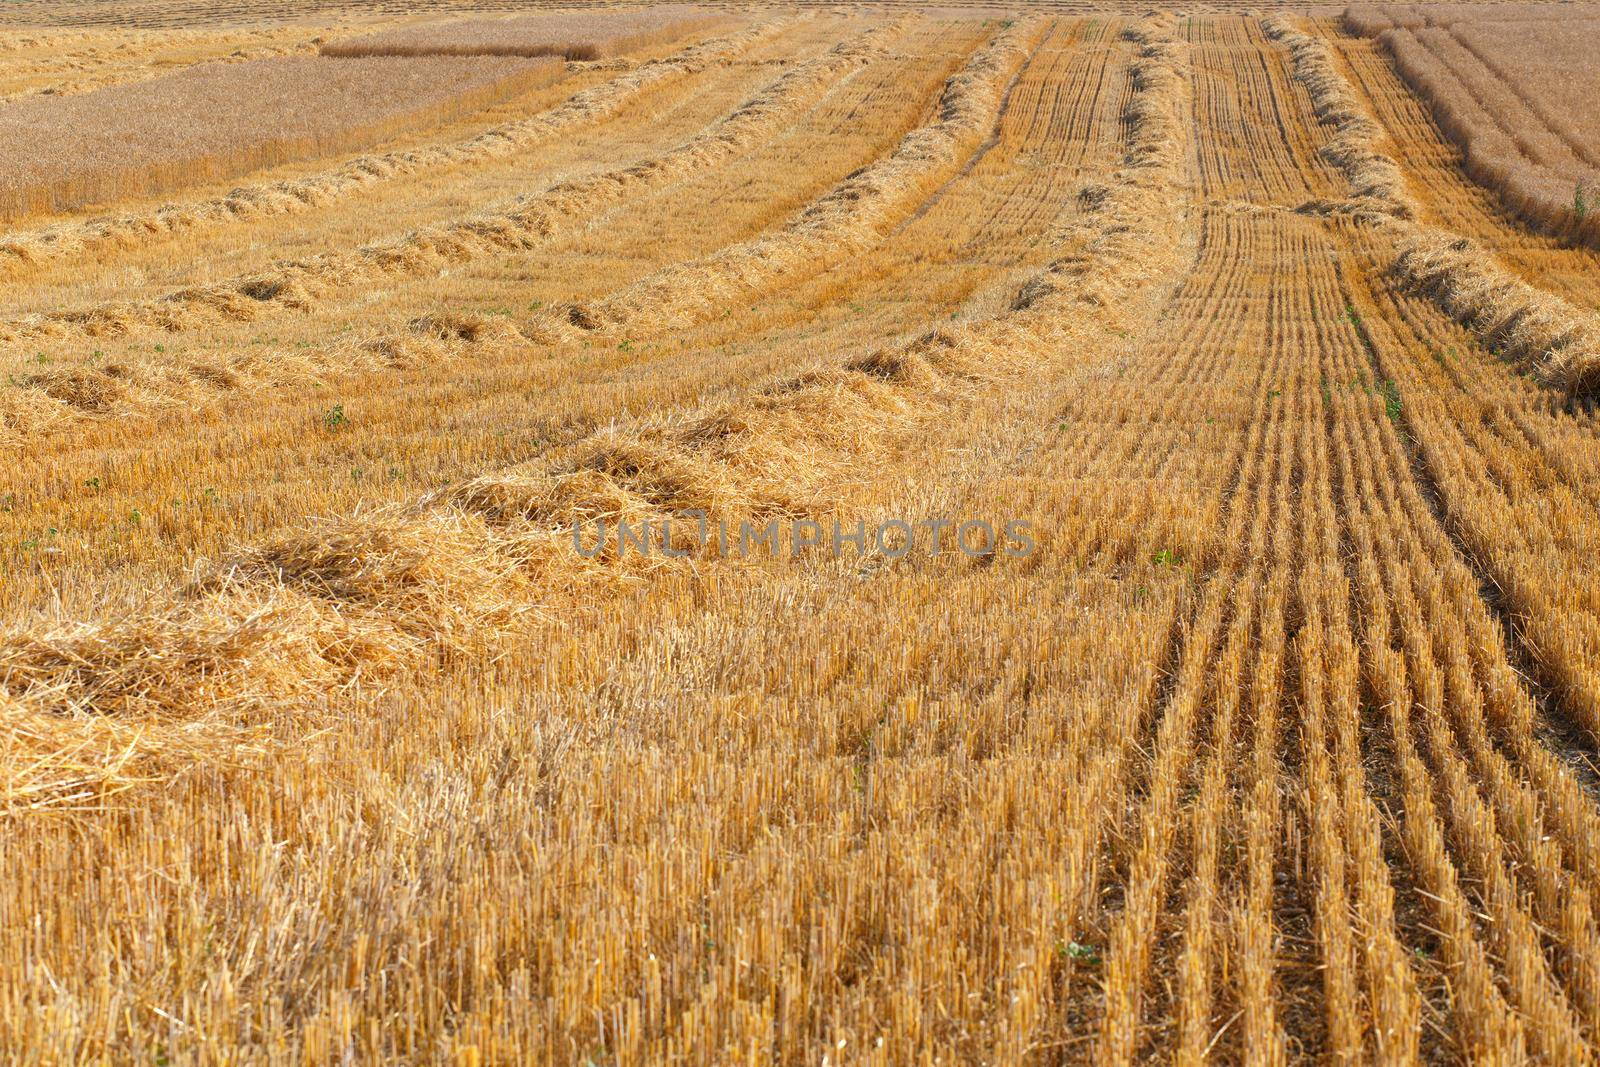 Harvested field with shafts of straw prepared for making bales